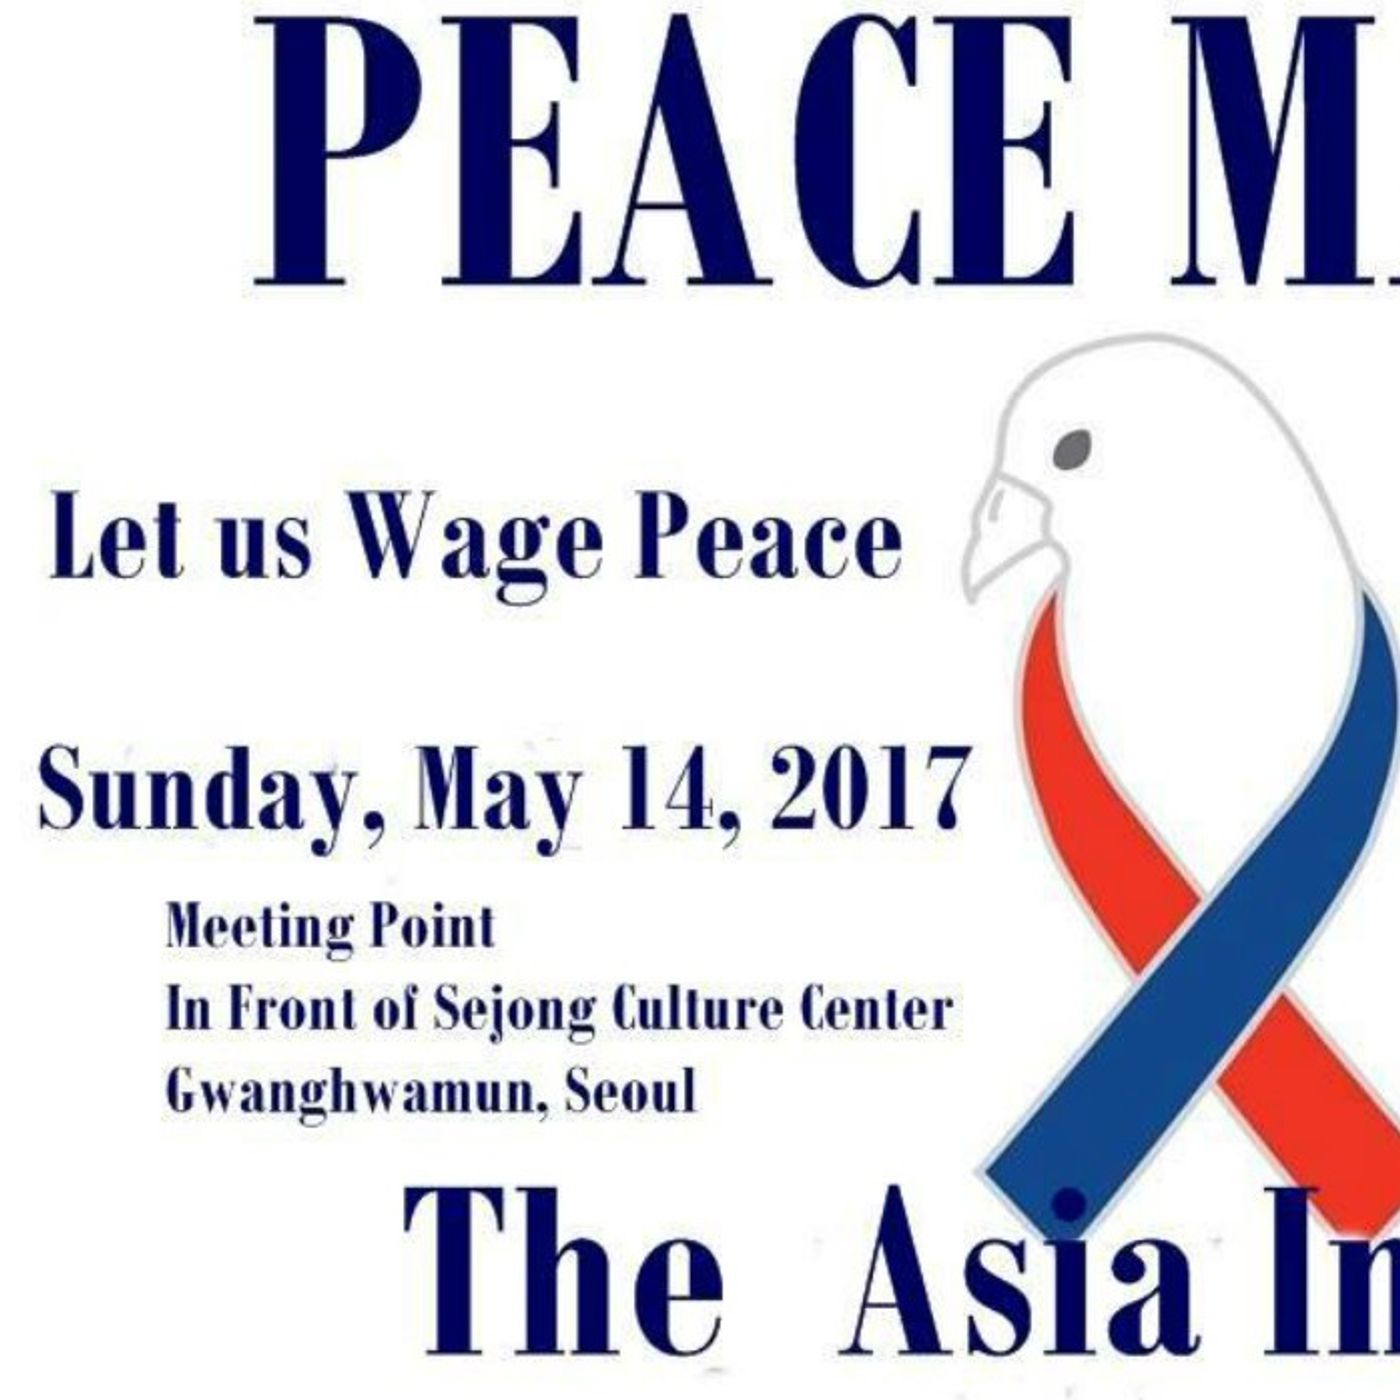 Asia Institute's "Korea Peace March" This Sunday, May 14th In Seoul